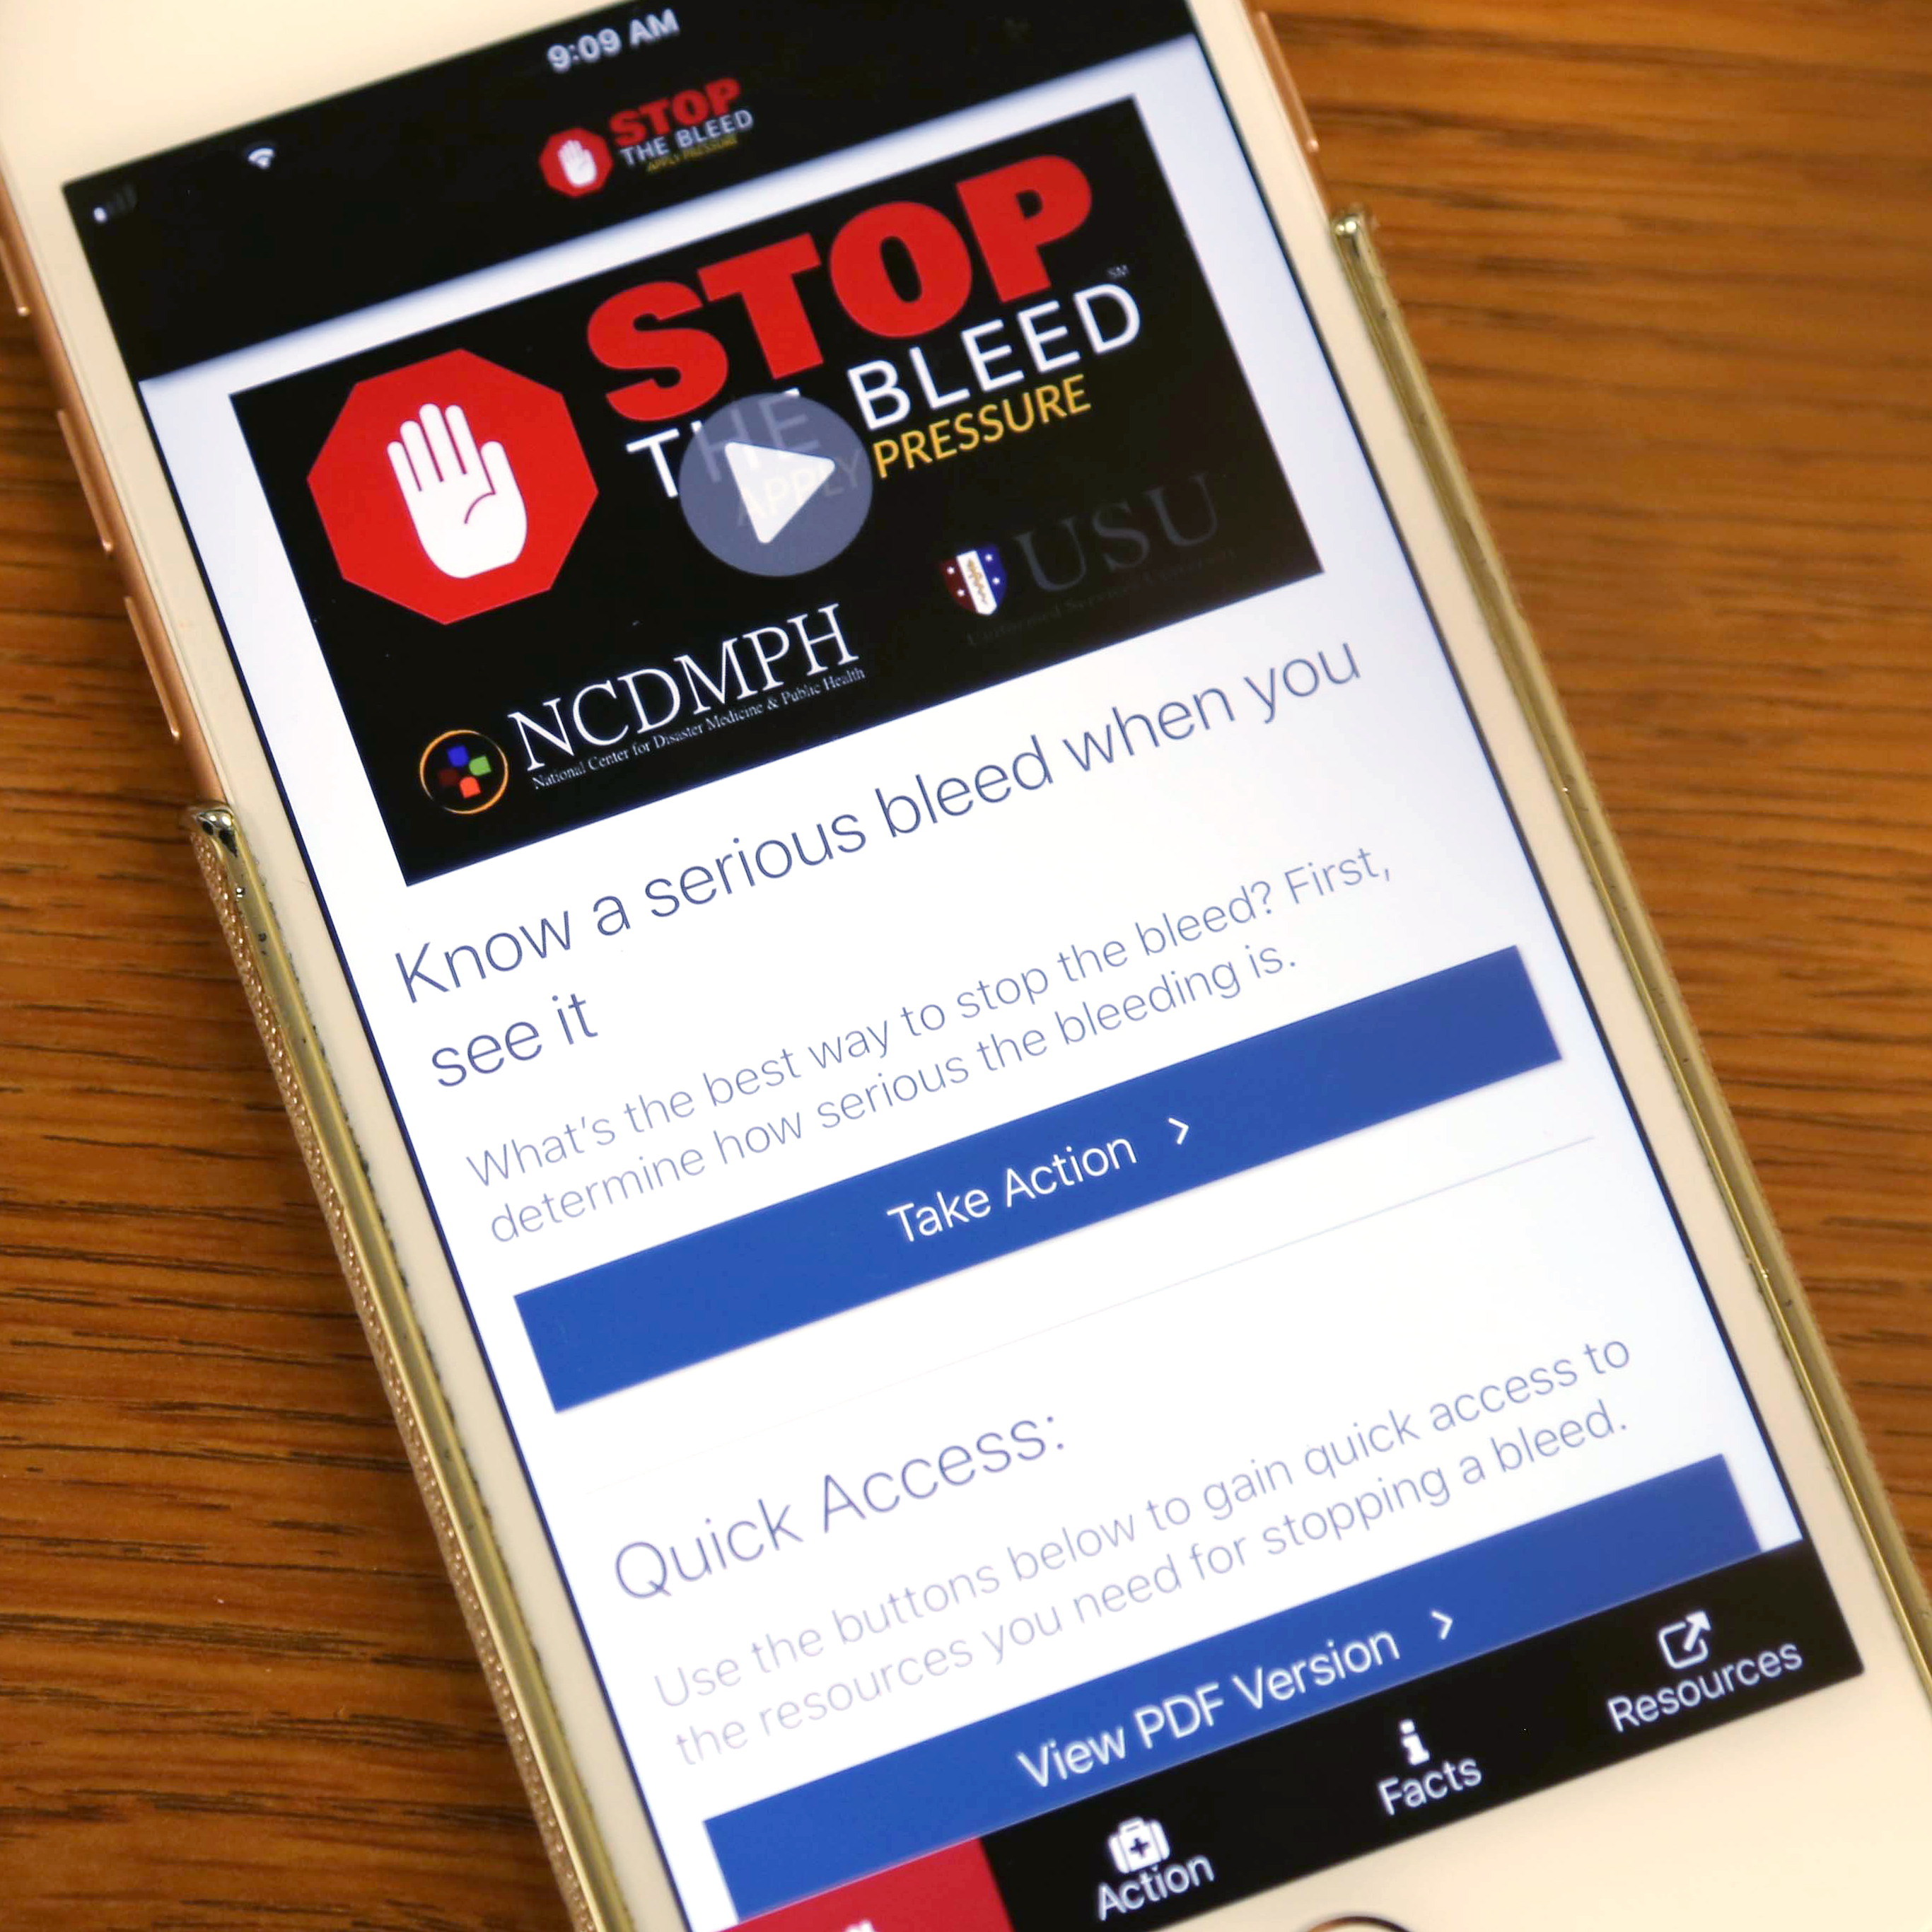 Photo of a cell phone with the Stop the Bleed app on the display.